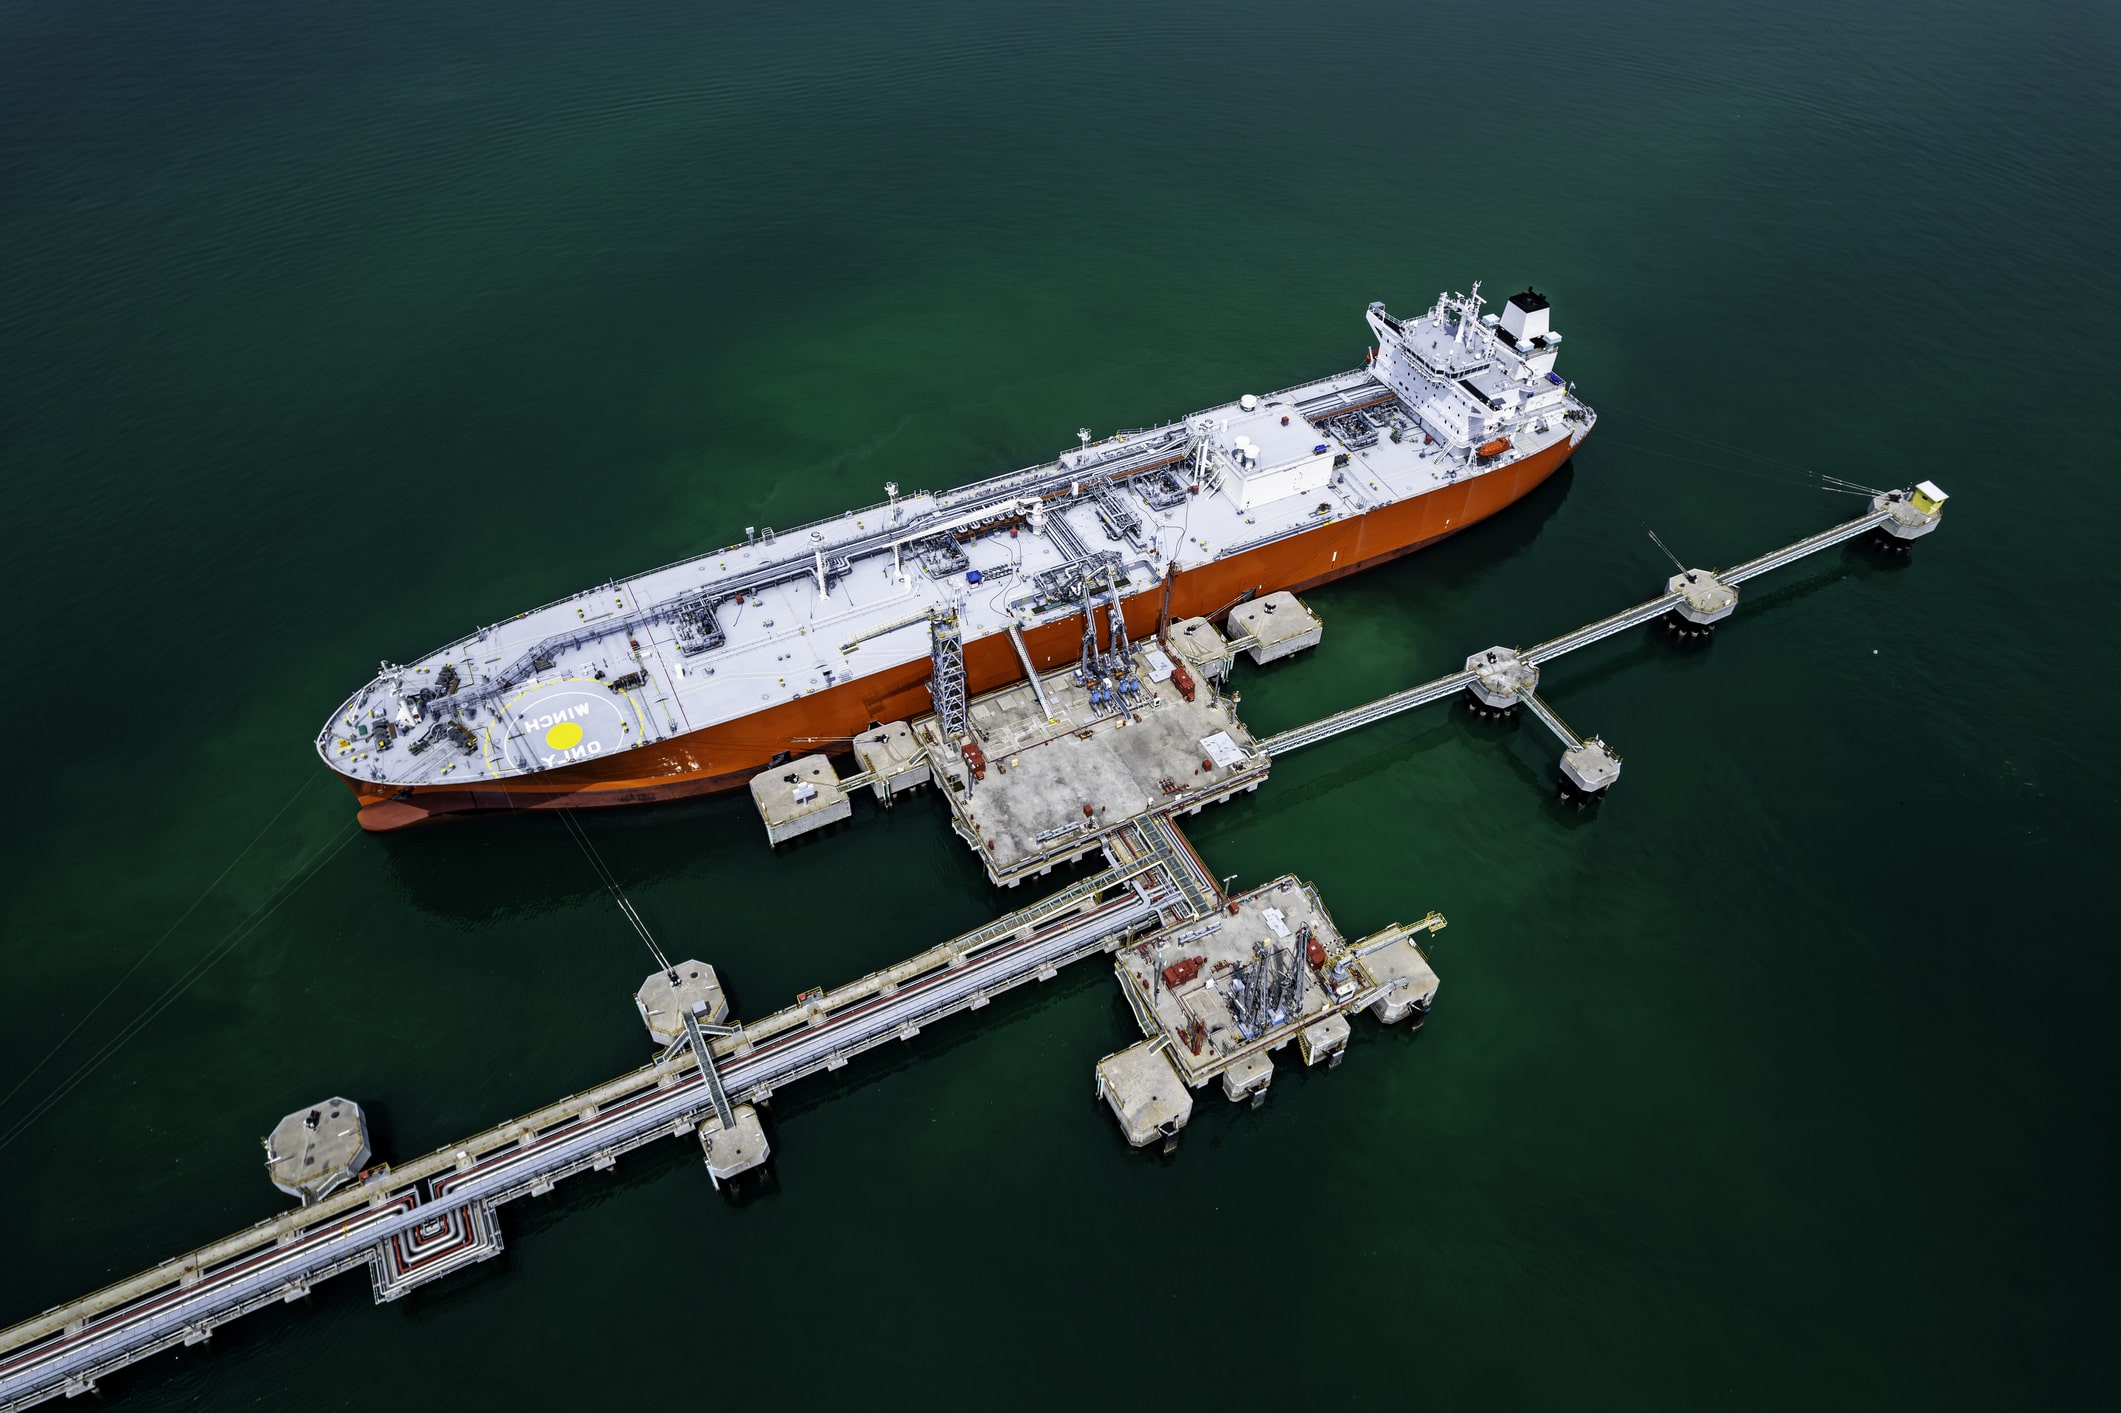 Vibration Monitoring Systems Onboard Oil Tankers